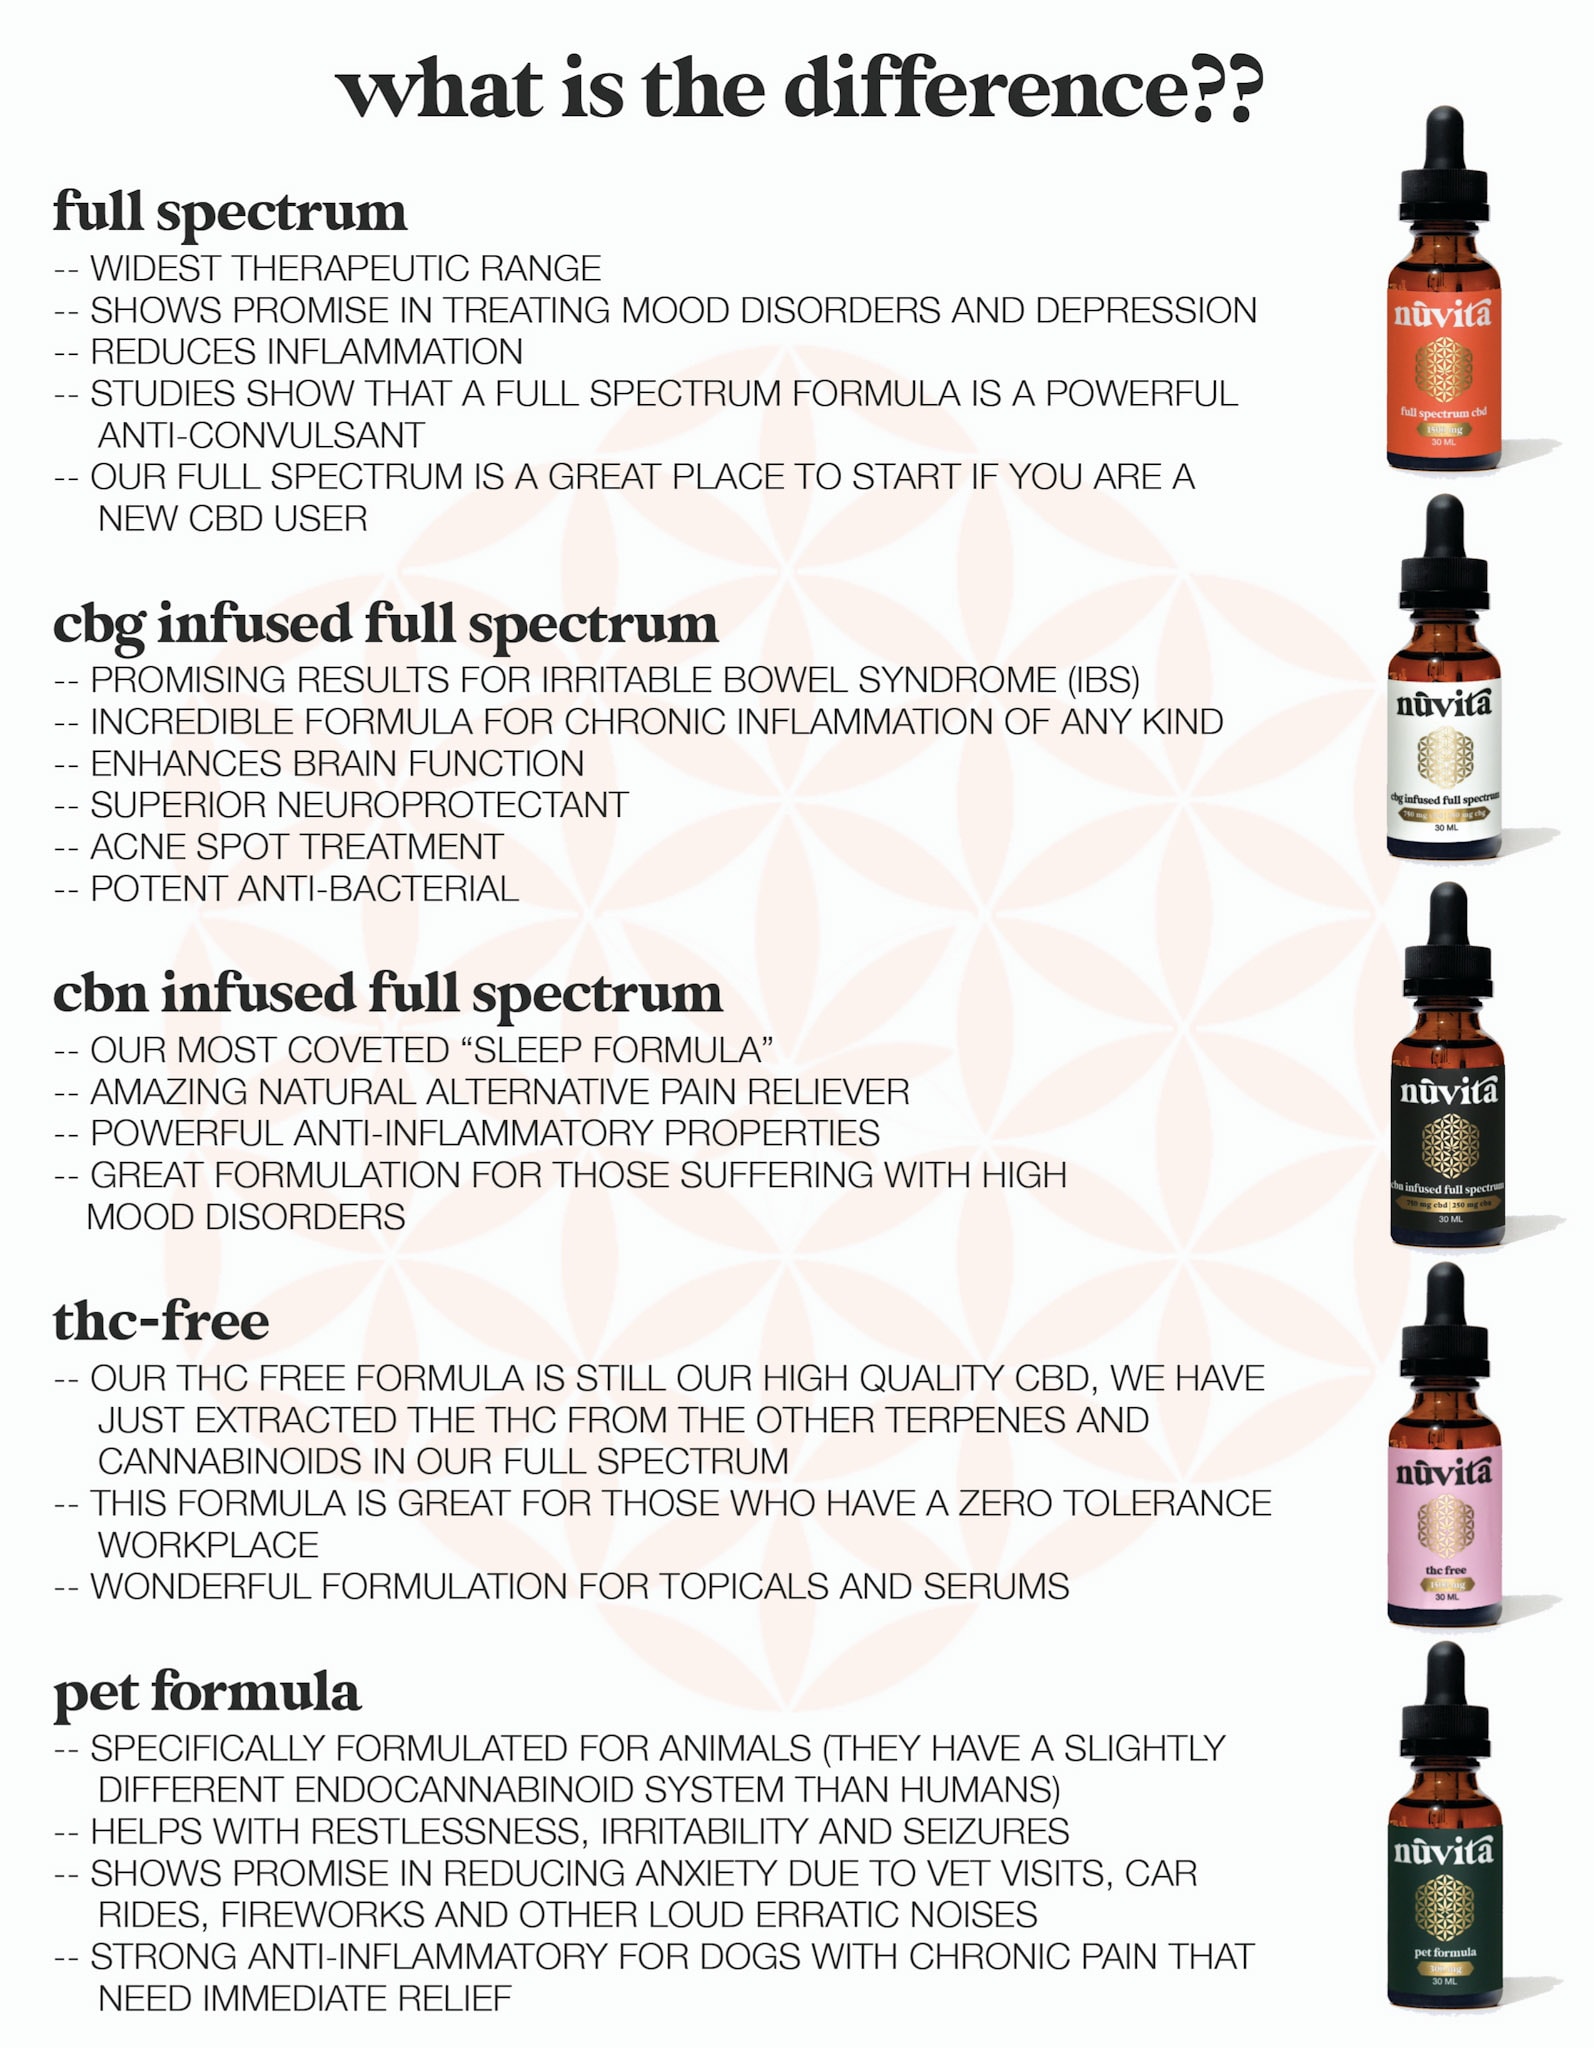 A list of the different oils offered by Nuvita from full spectrum, CBG infused full spectrum, CBN infused full spectrum, THC-free, and pet formula along with a few benefits the pertain to the specific oil listed below its name. Each bottle is visible to the right of the image, in line with its name and descriptions. 